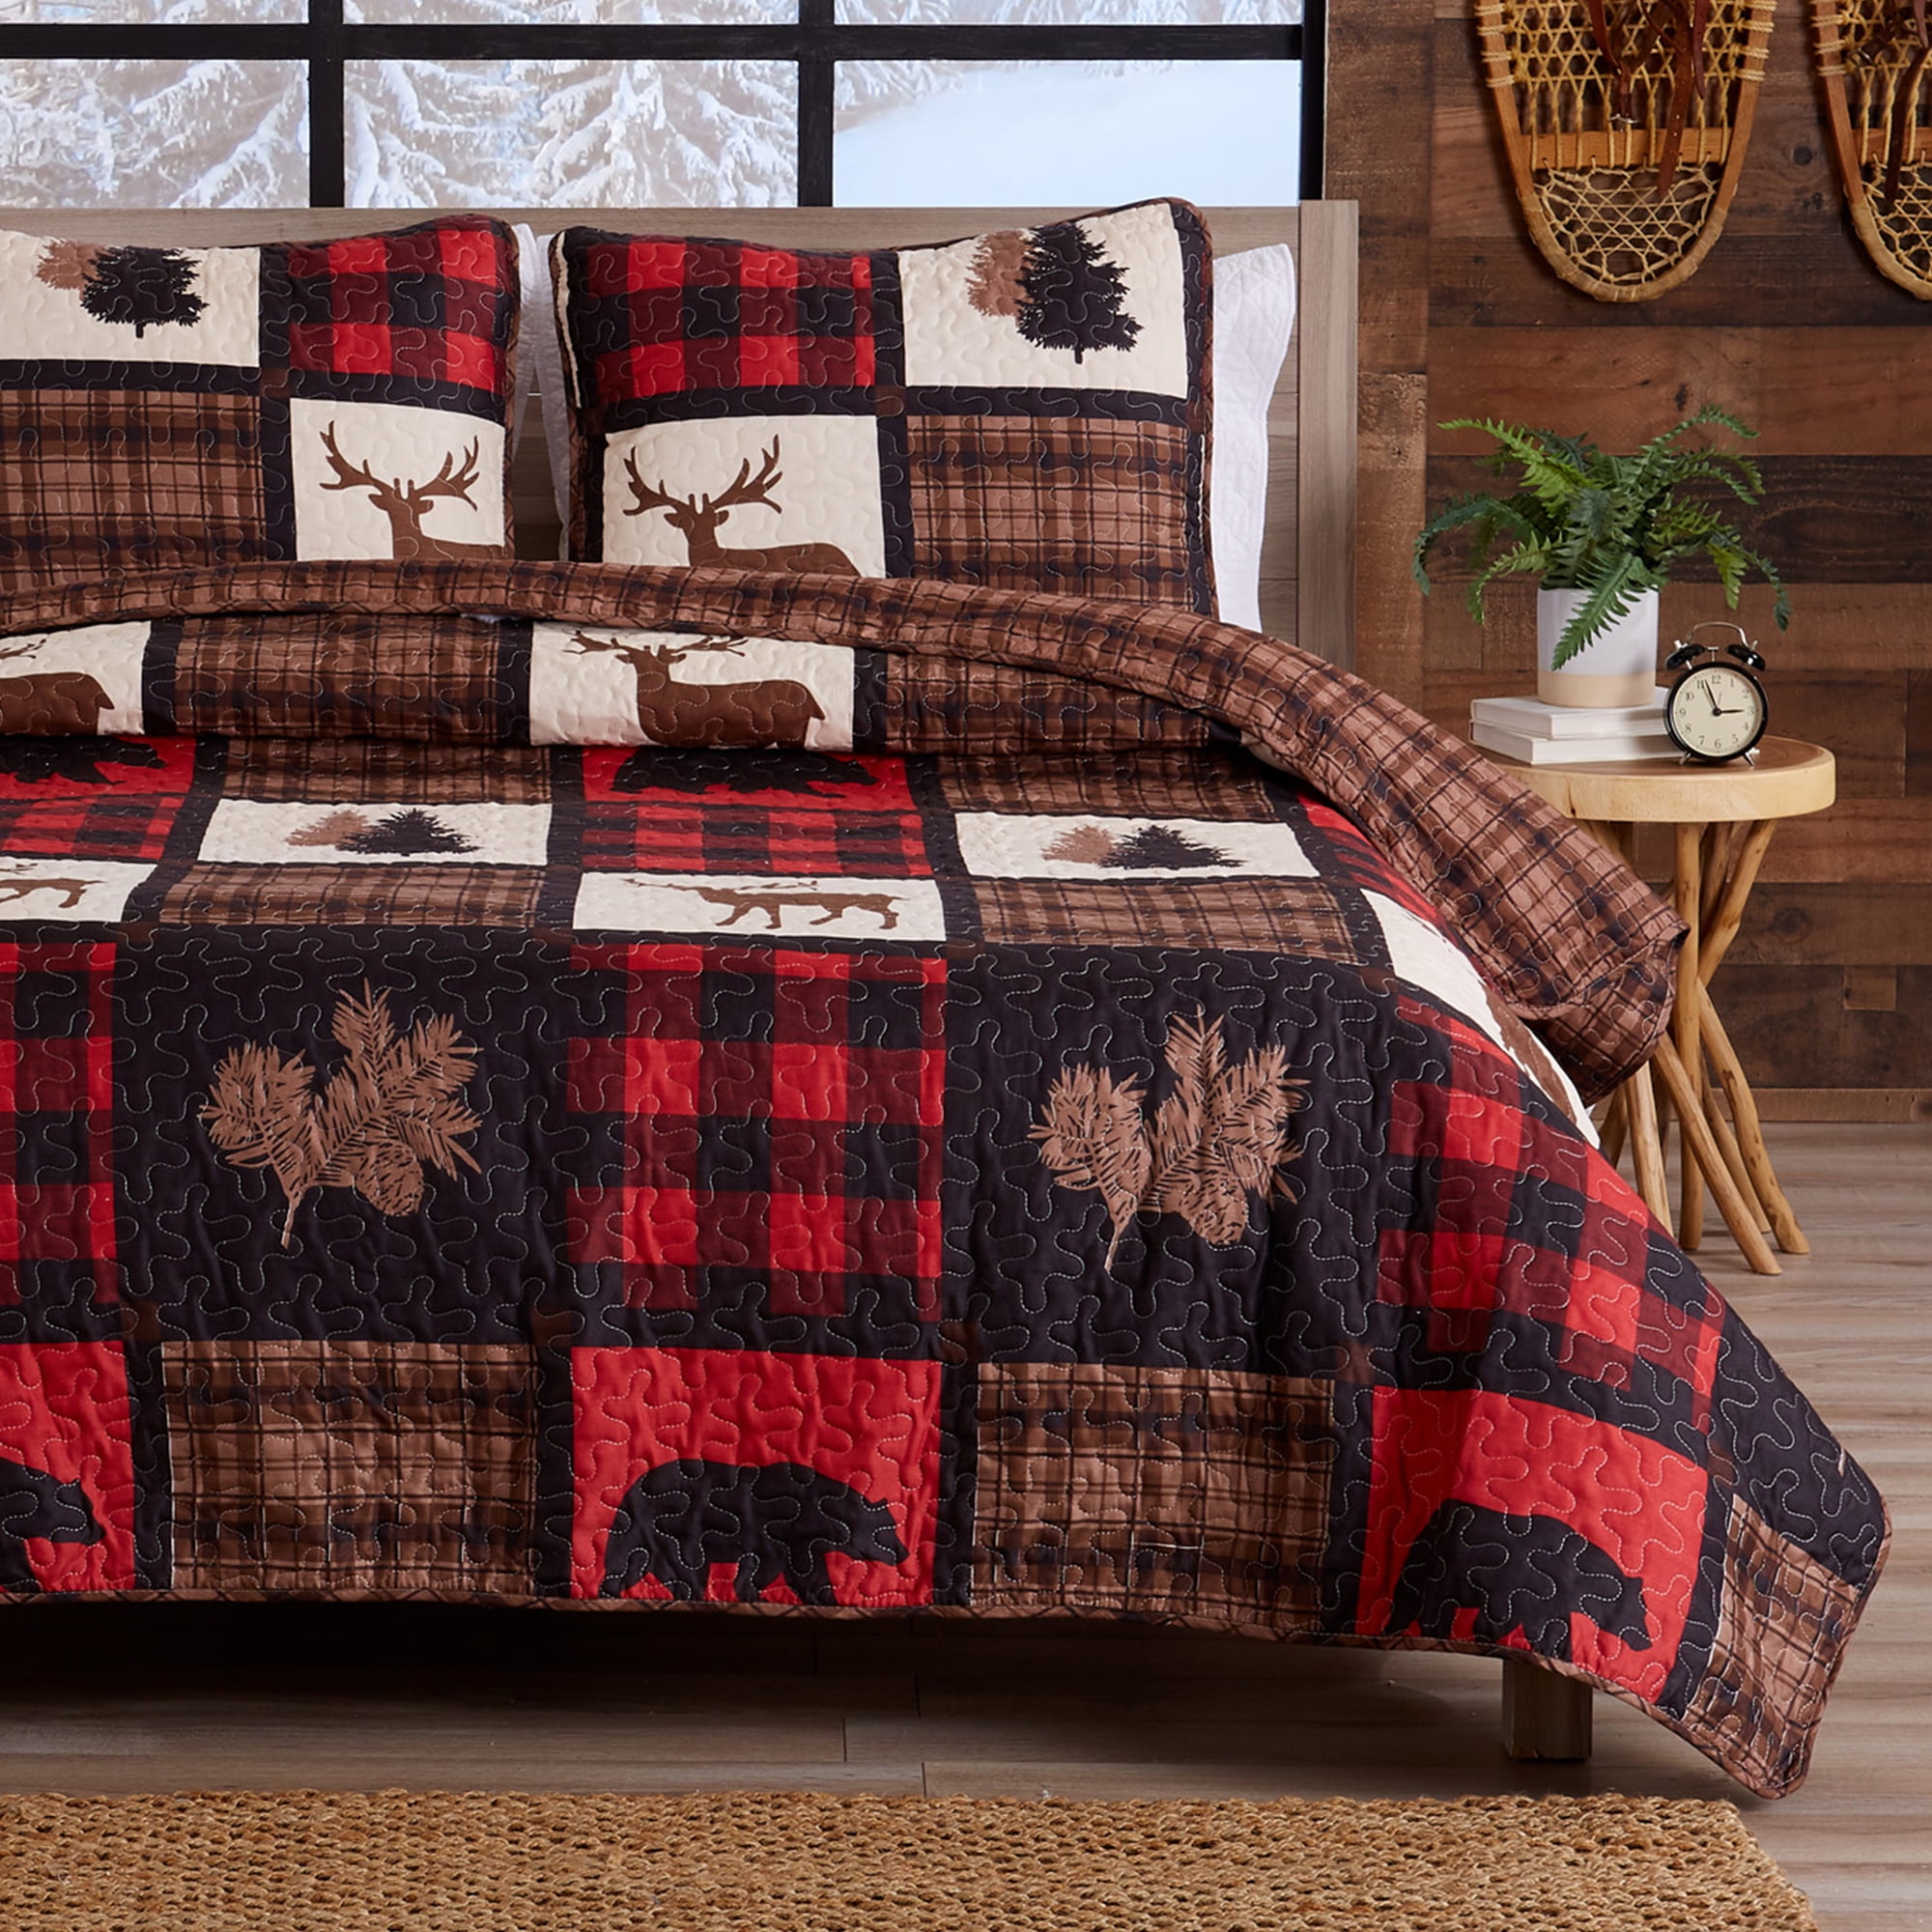 Details about   BEAUTIFUL LOG CABIN PATCHWORK RED PINK GREEN BROWN BLUE SOUTHWEST QUILT SET ~ 